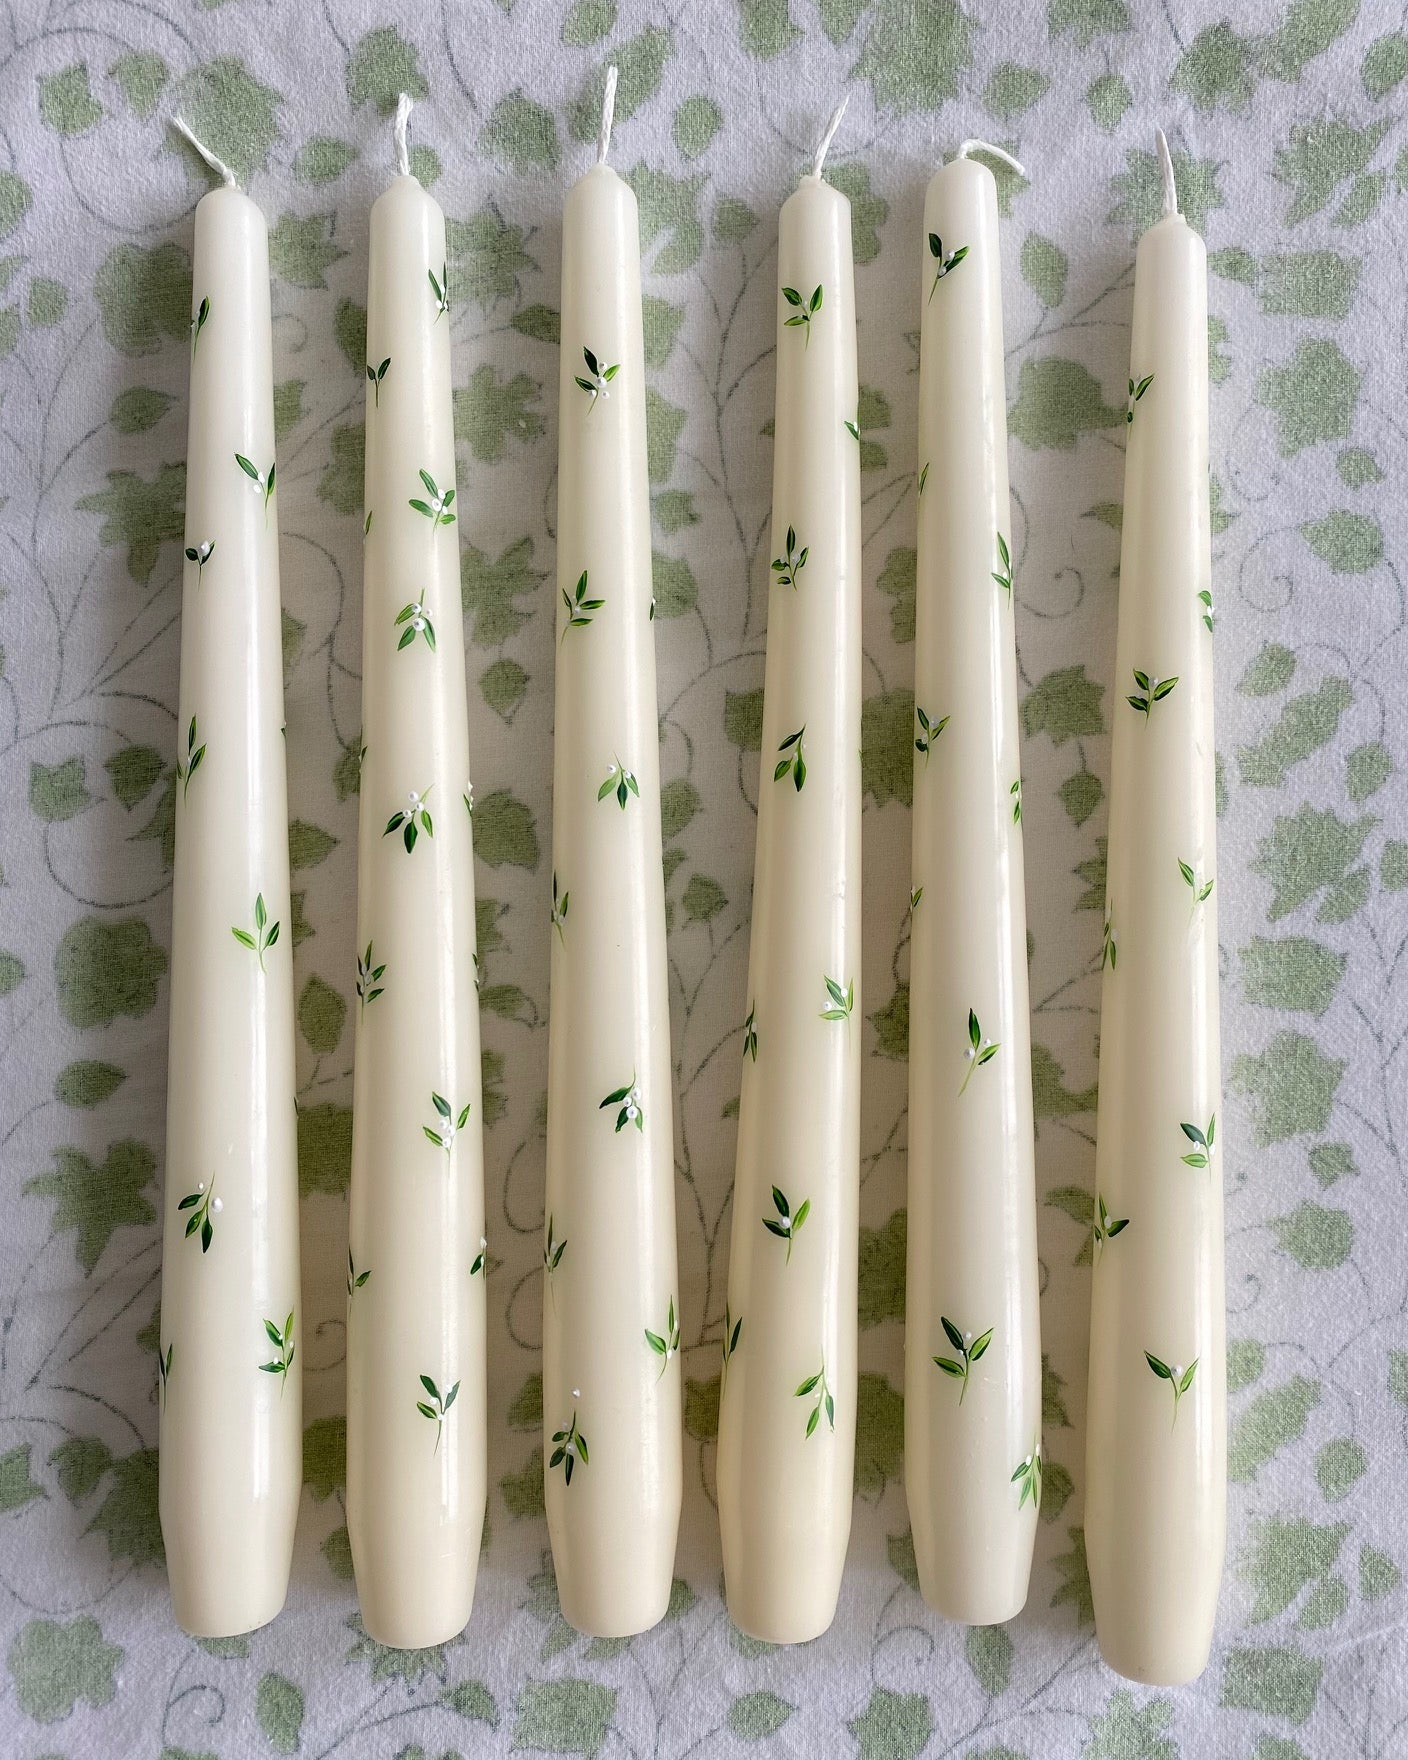 hand painted ivory wedding candles